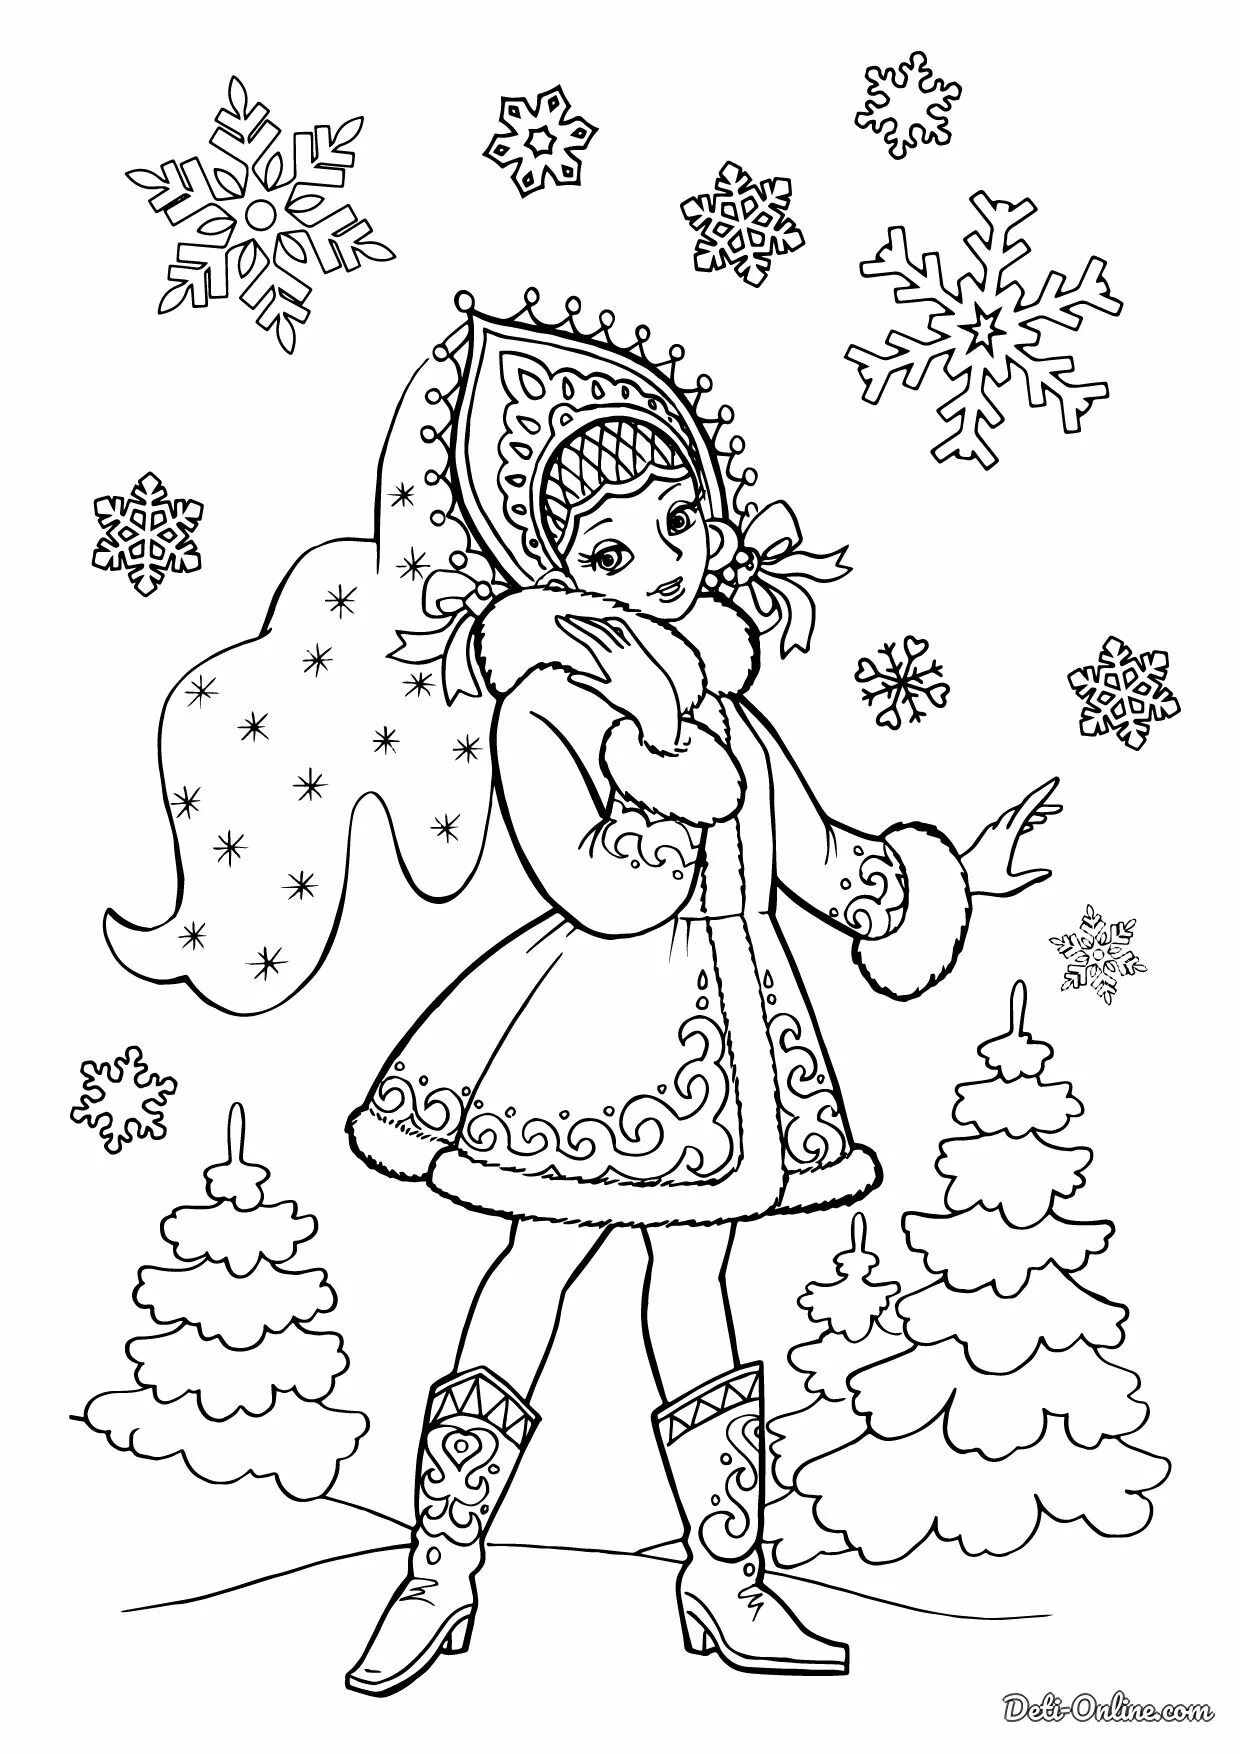 Exciting Christmas coloring book for girls 8 years old